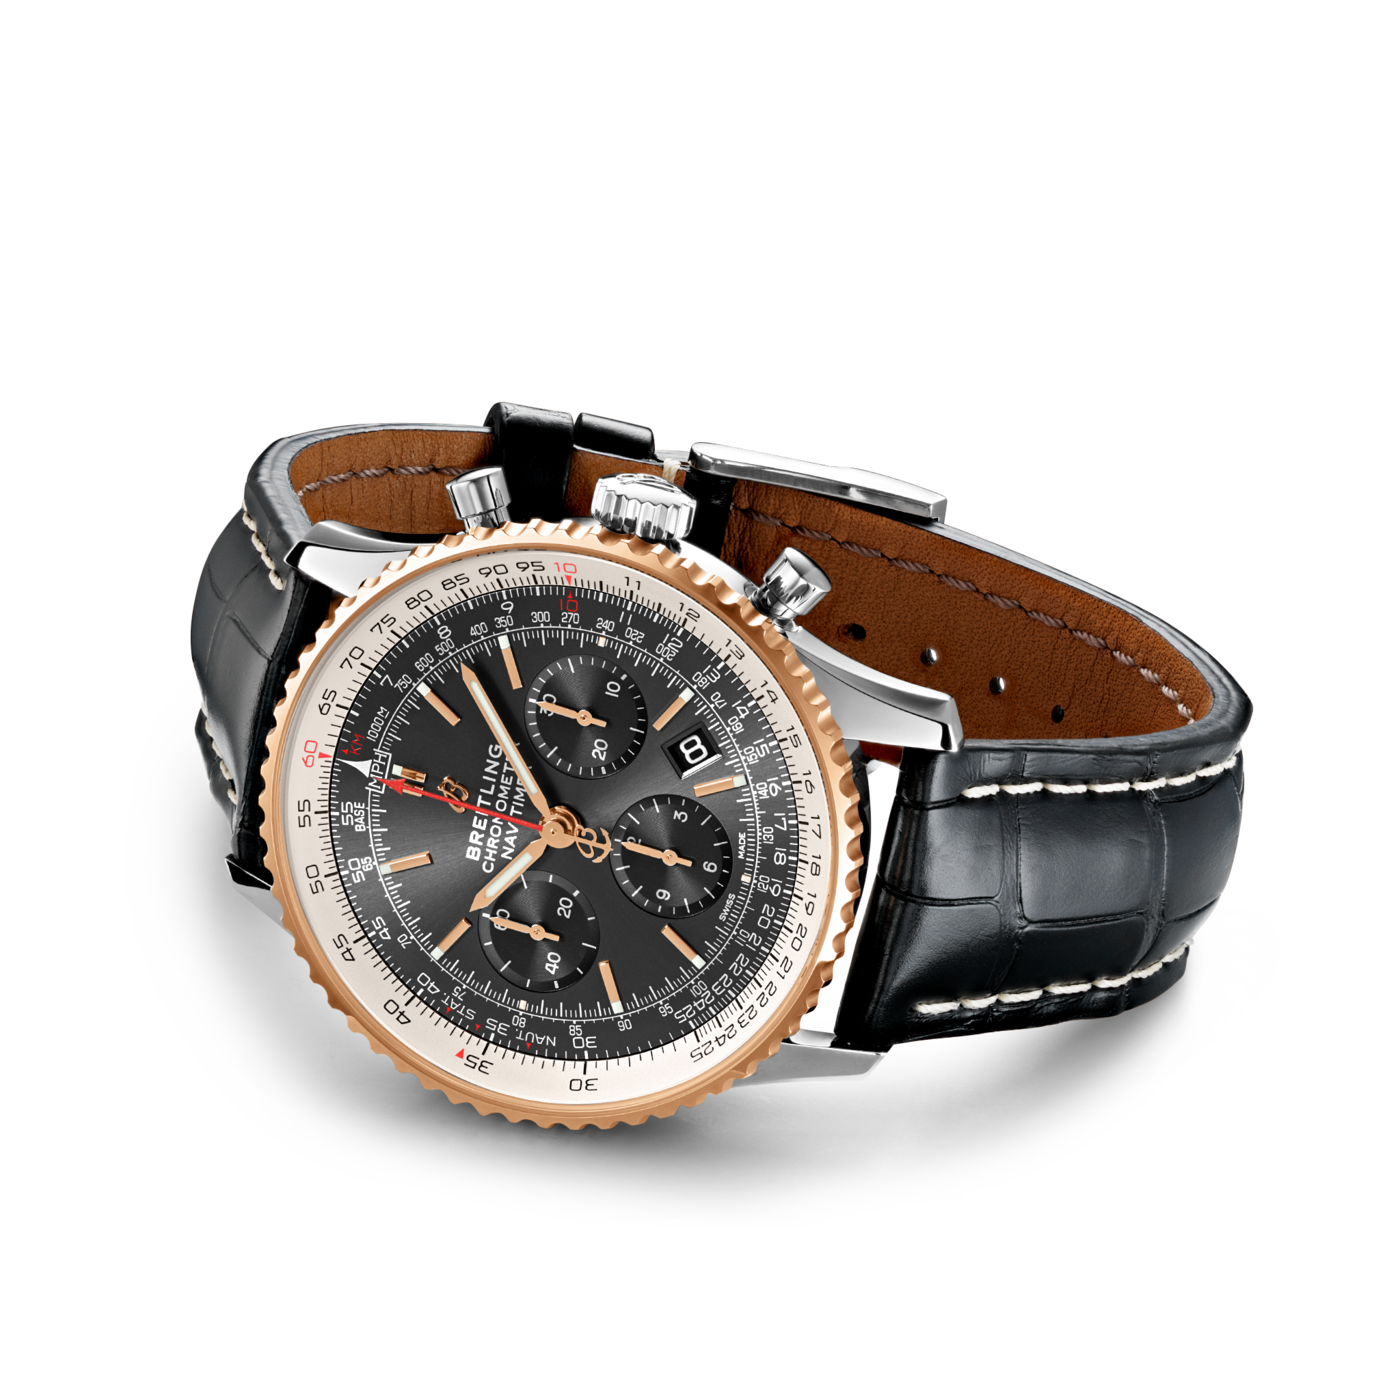 ub0121211f1p2-navitimer-b01-chronograph-43-rolled-up.png